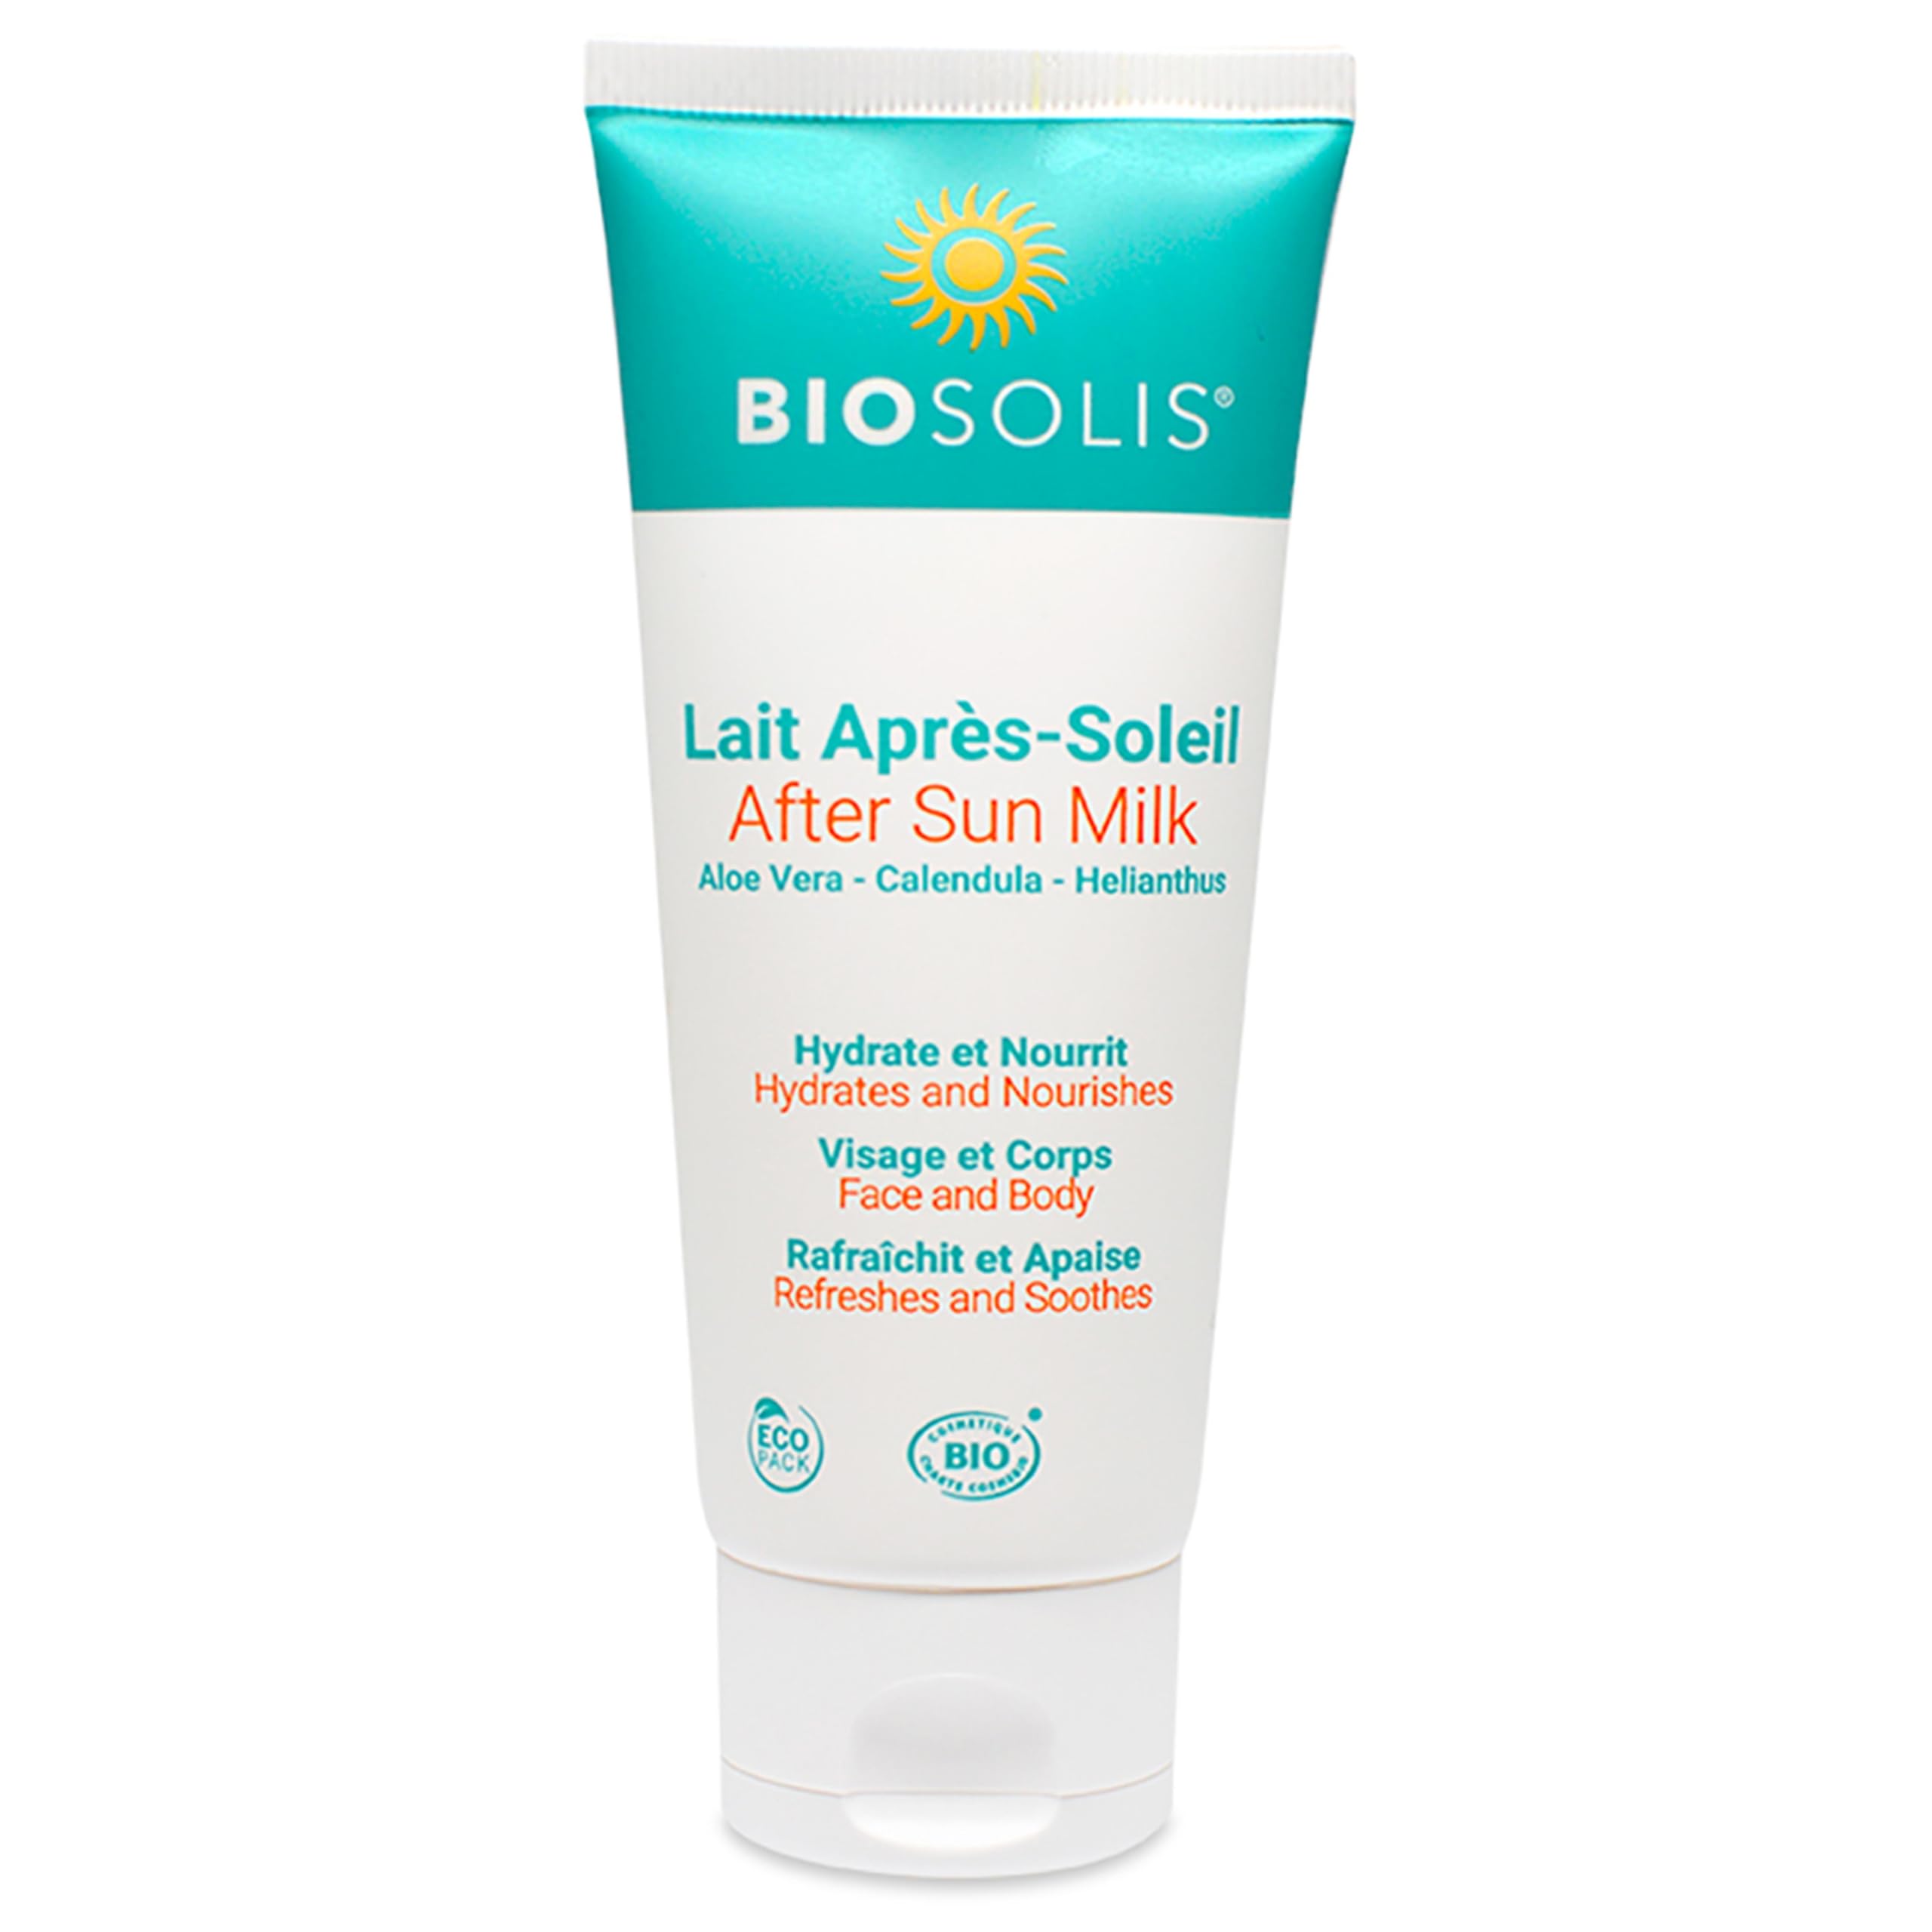 Biosolis After Sun Milk - Softens and Calms Your Skin After Sun Exposure - Soothes and Refreshes Your Face and Body - Creamy and Penetrates the Skin Easily - Ideal for the Whole Family - 3.4 oz